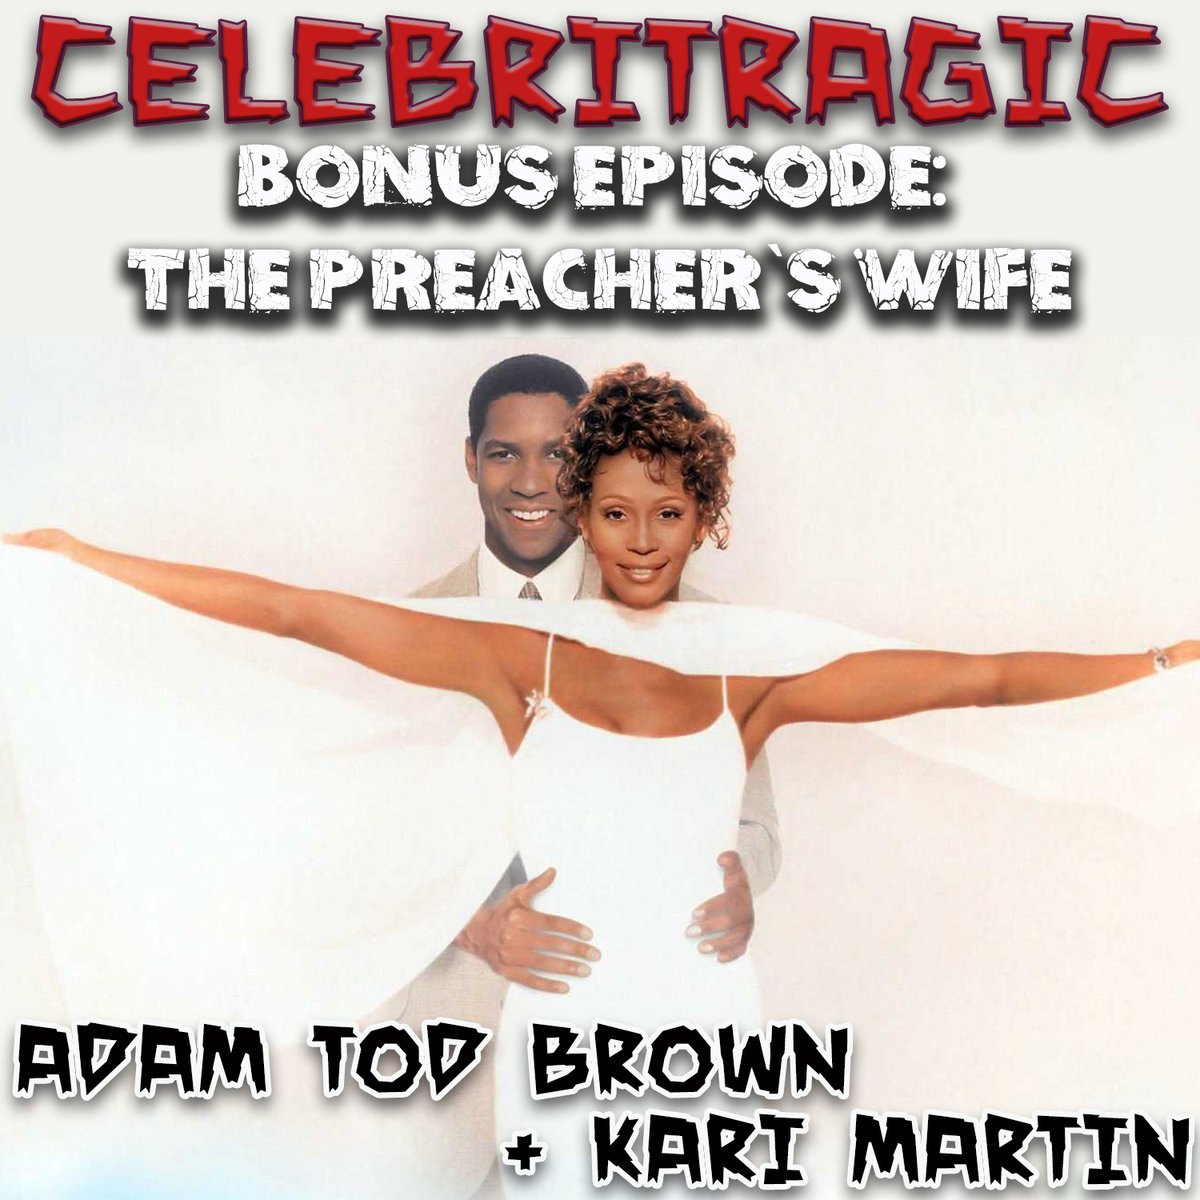 New bonus episode up now on the @Unpops Patreon and Supercast channels! @adamtodbrown and @karimartin722 discuss the Whitney Houston Christmas classic (?) The Preacher's Wife! Get it at patreon.com/unpops or unpopsnetwork.supercast.tech!